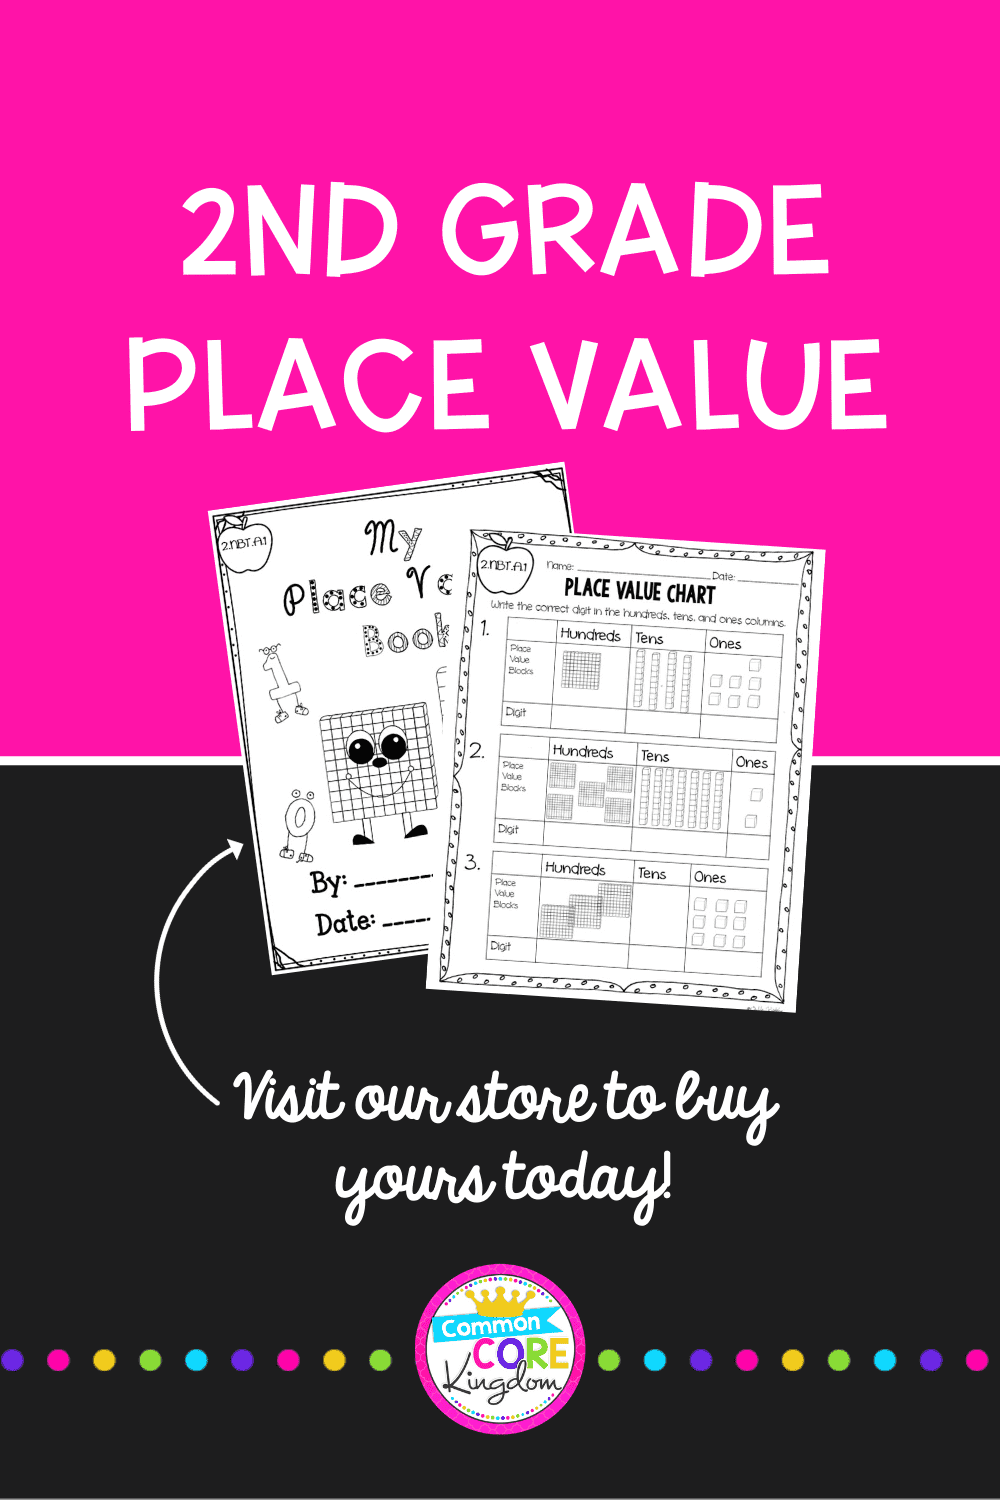 2nd grade place value pin showing images of worksheets